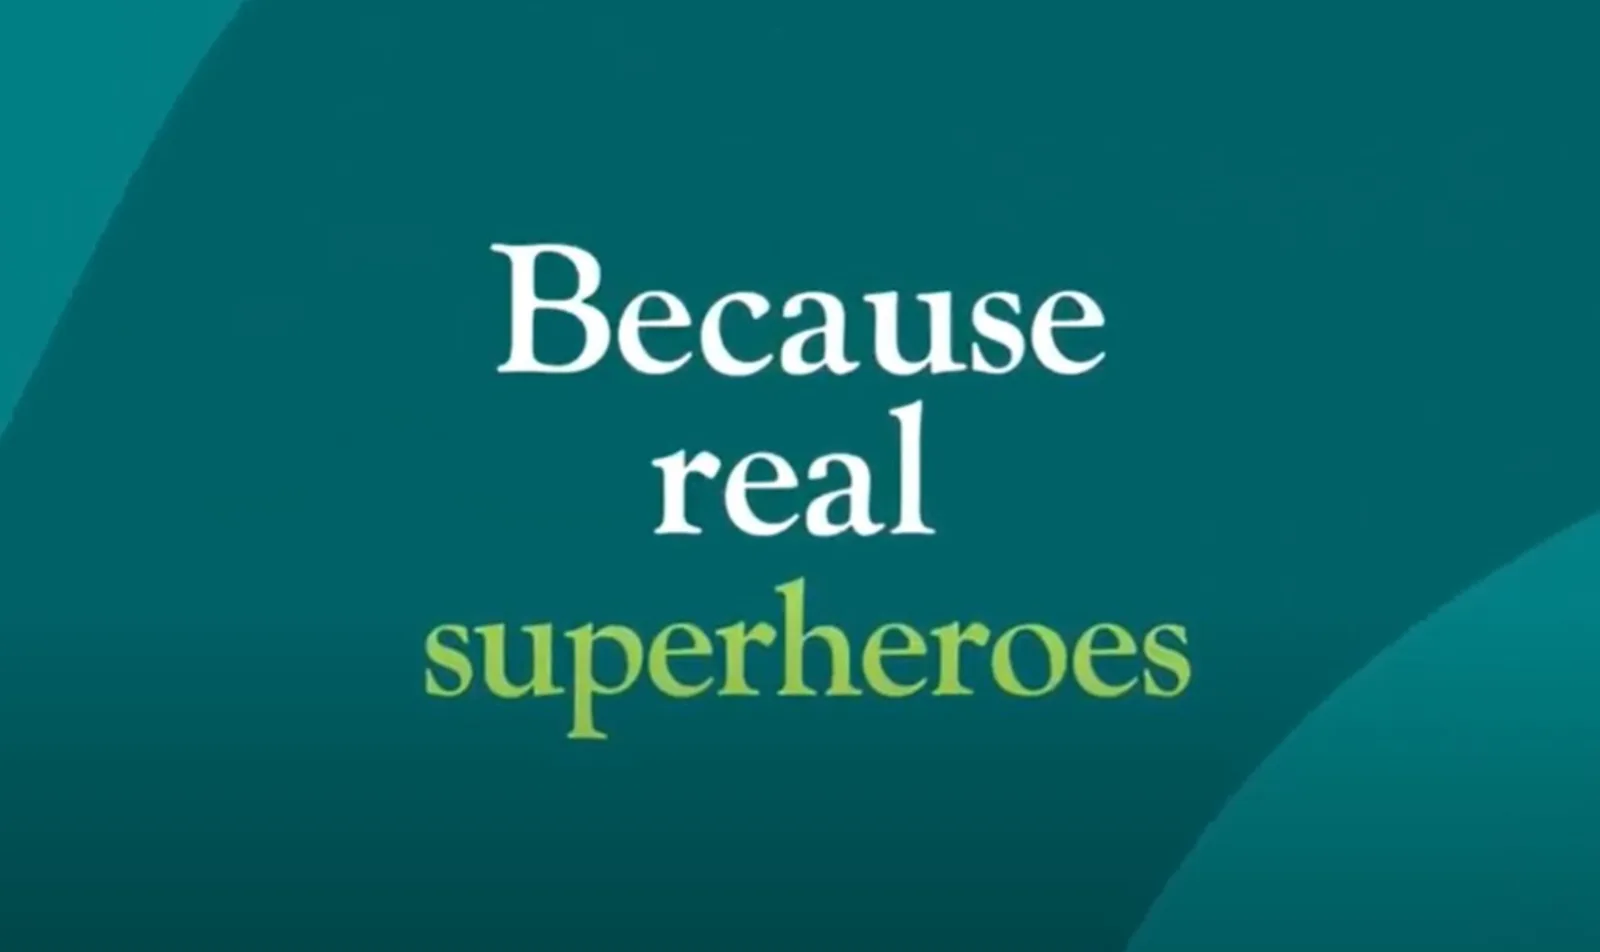 A video thumbnail for the The REAL Superheroes: 红杏社区 Caregivers YouTube video